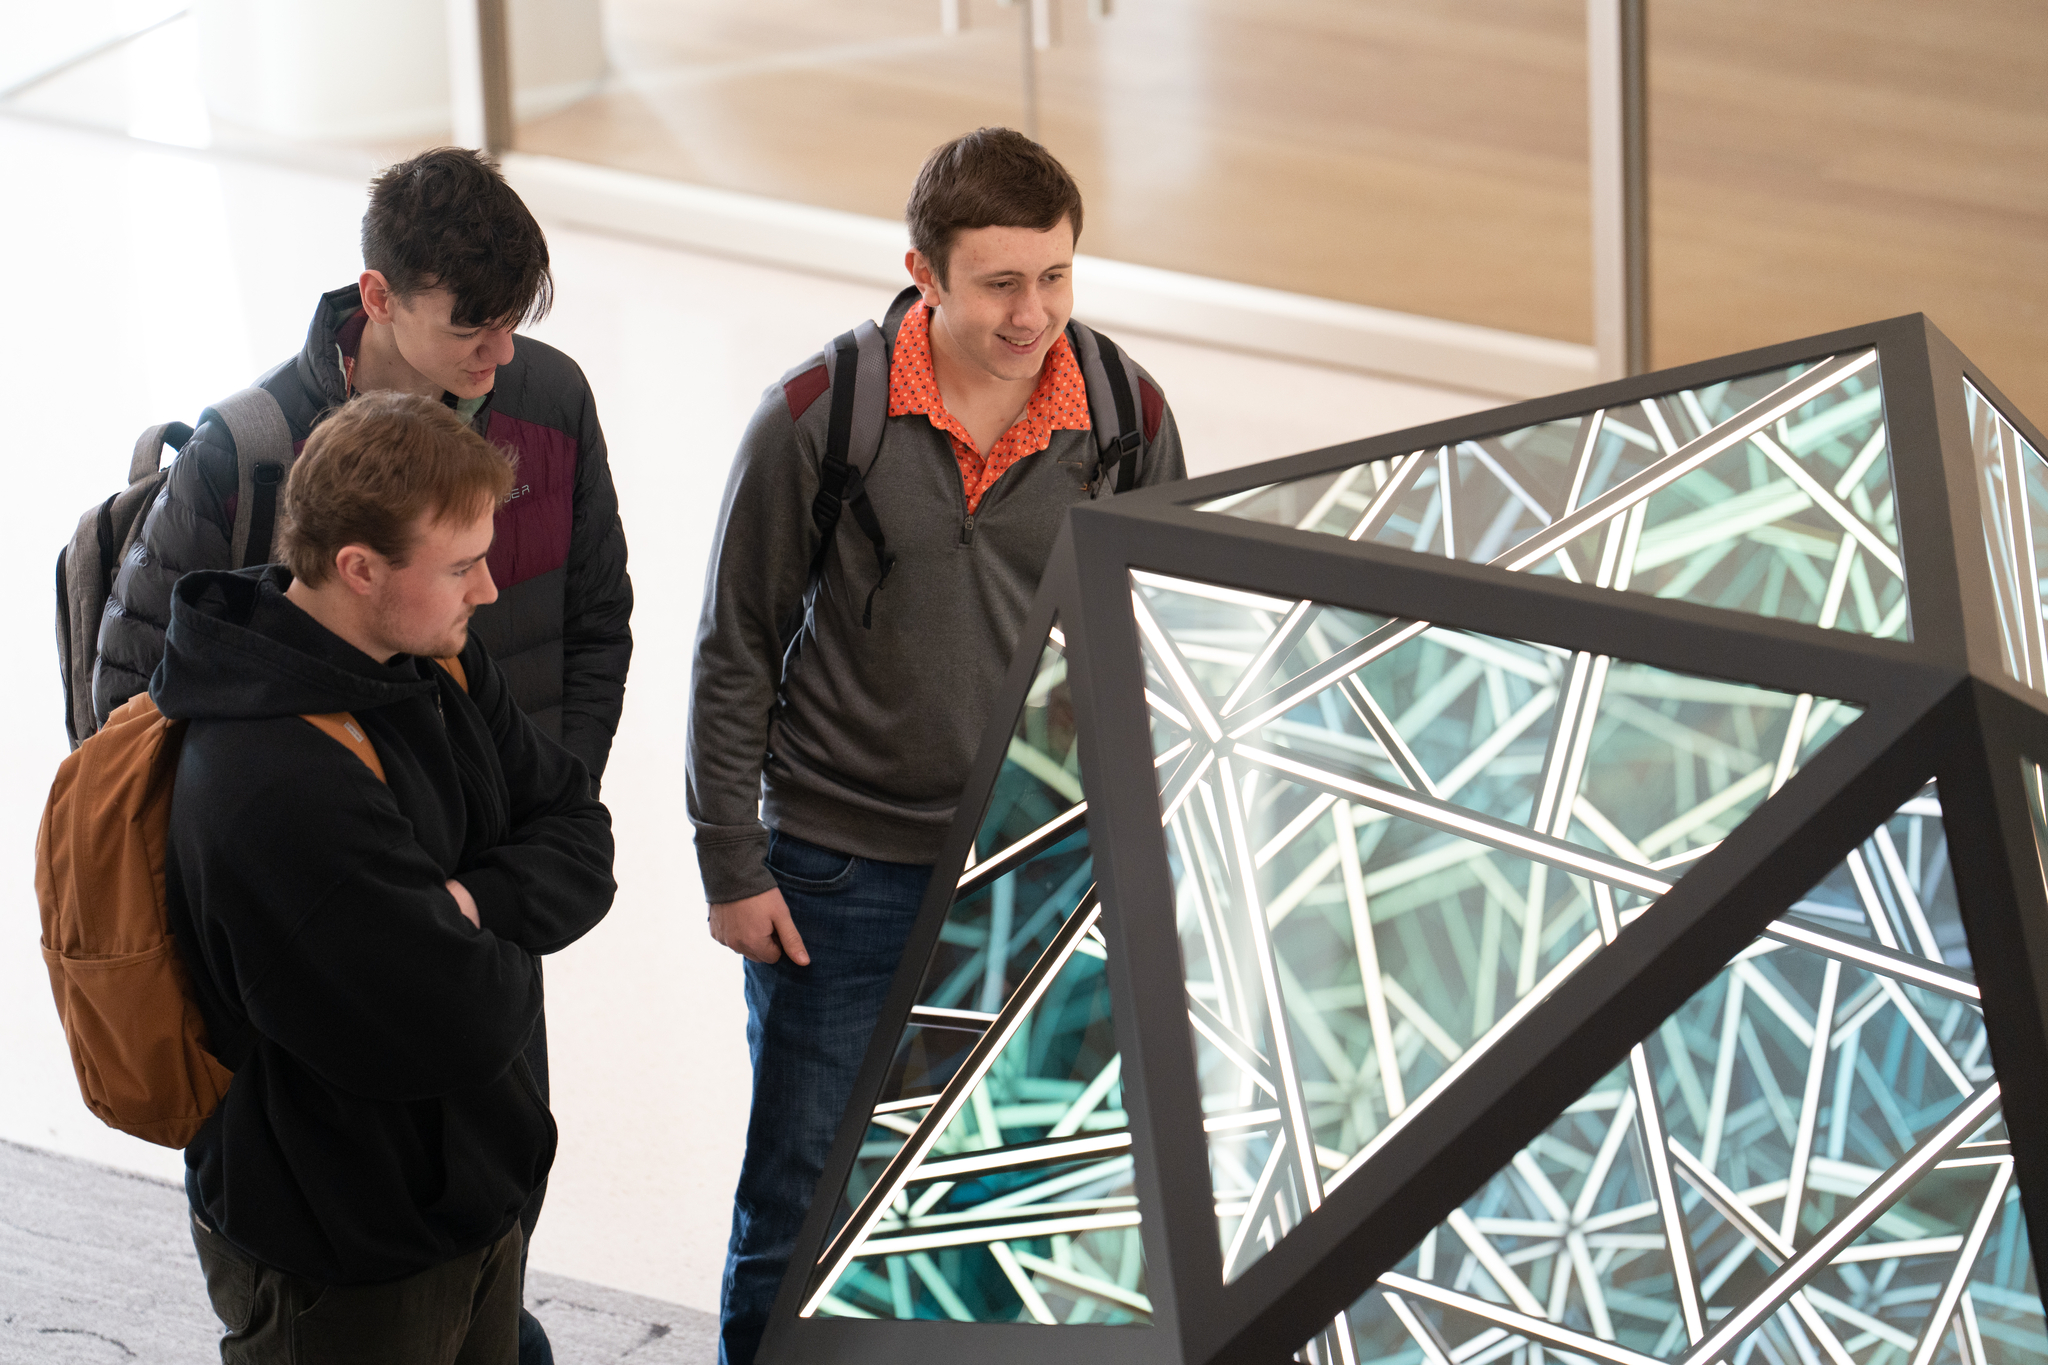 Students looking at the beautiful shape sculpture in the atrium